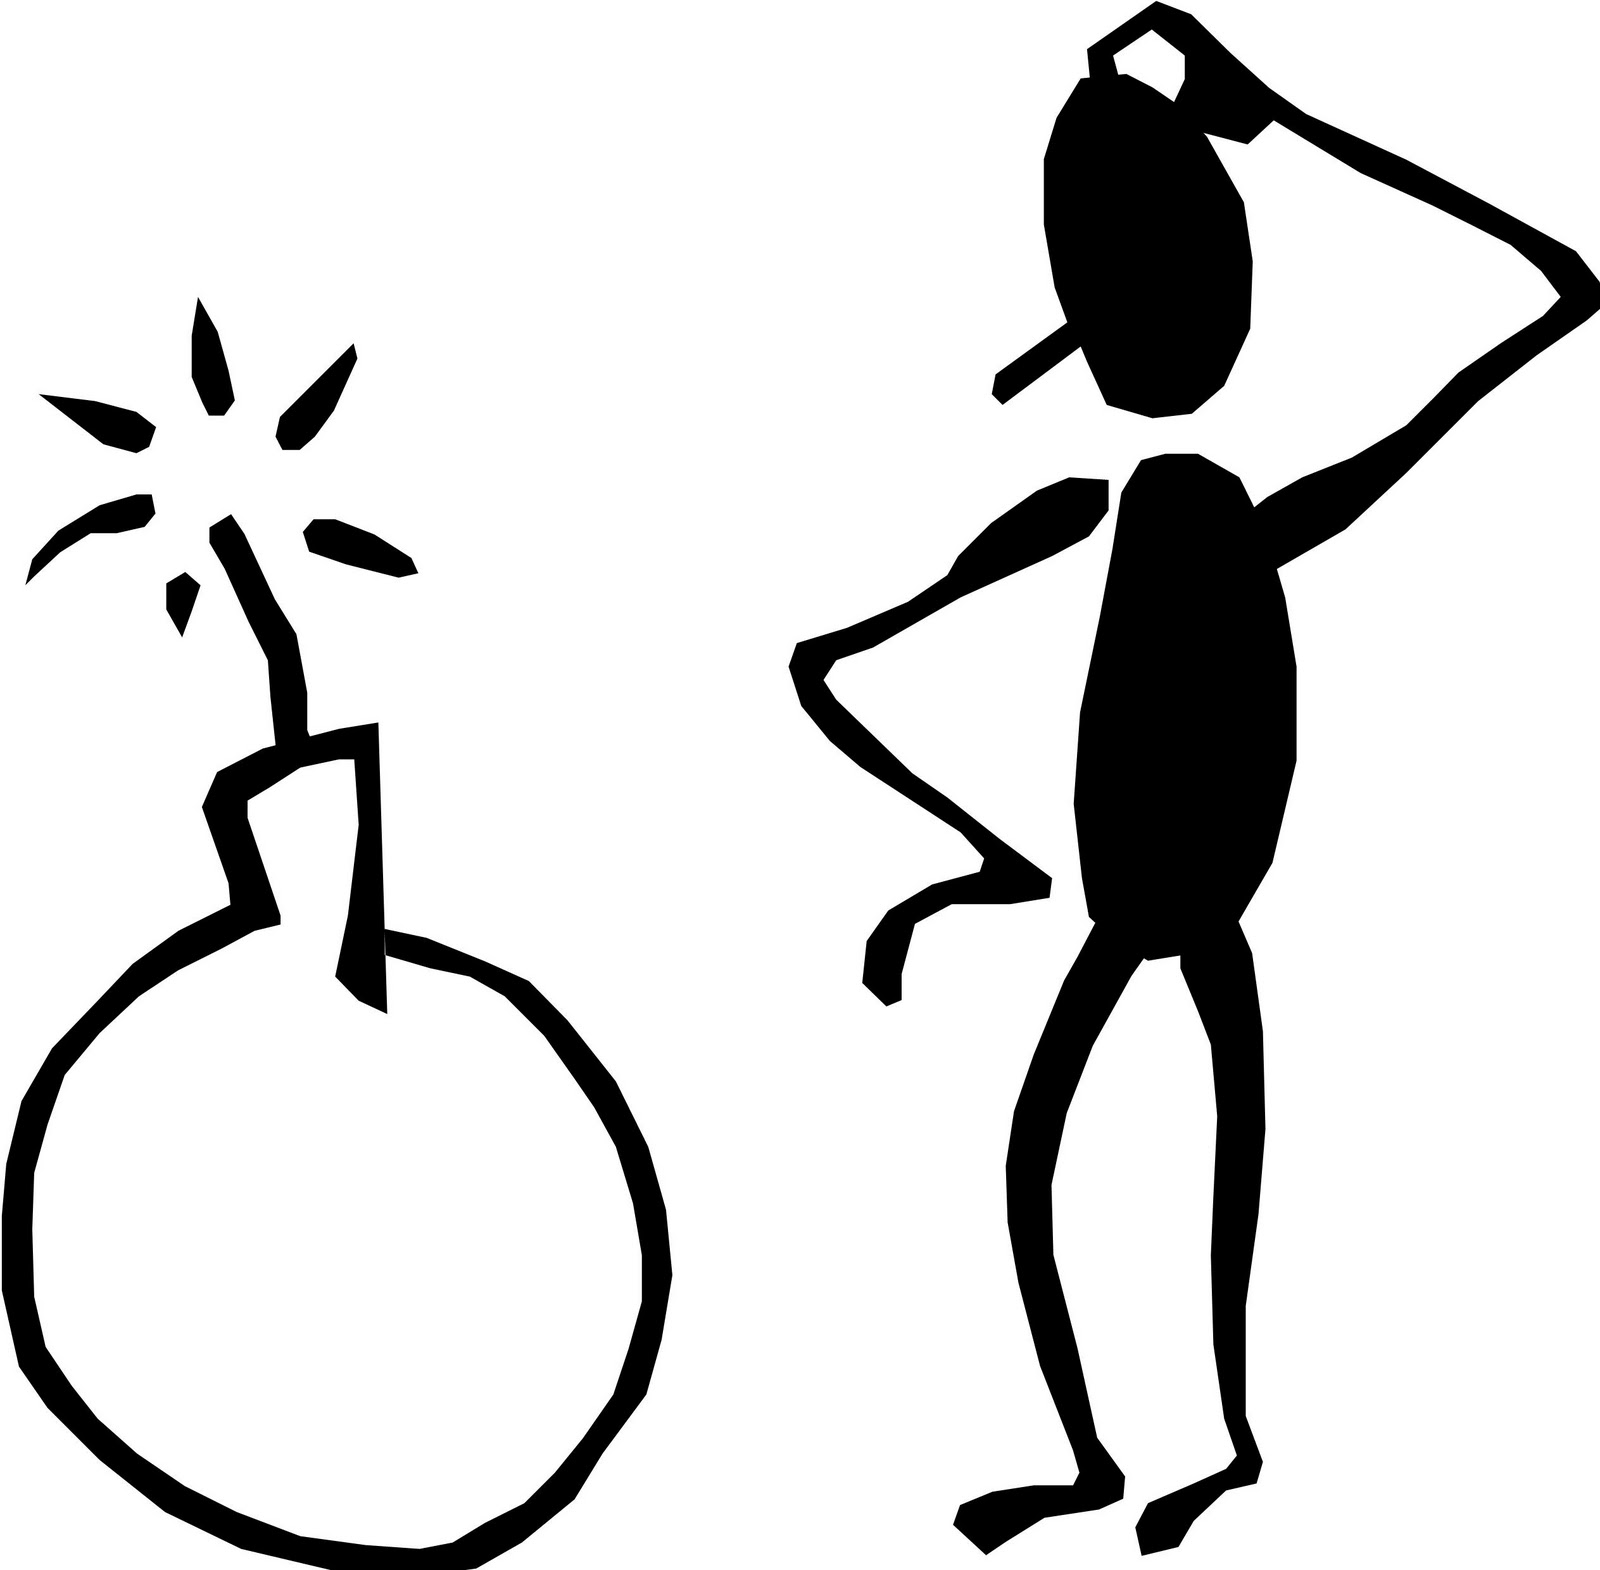 Thinking stick figure clipart clipart